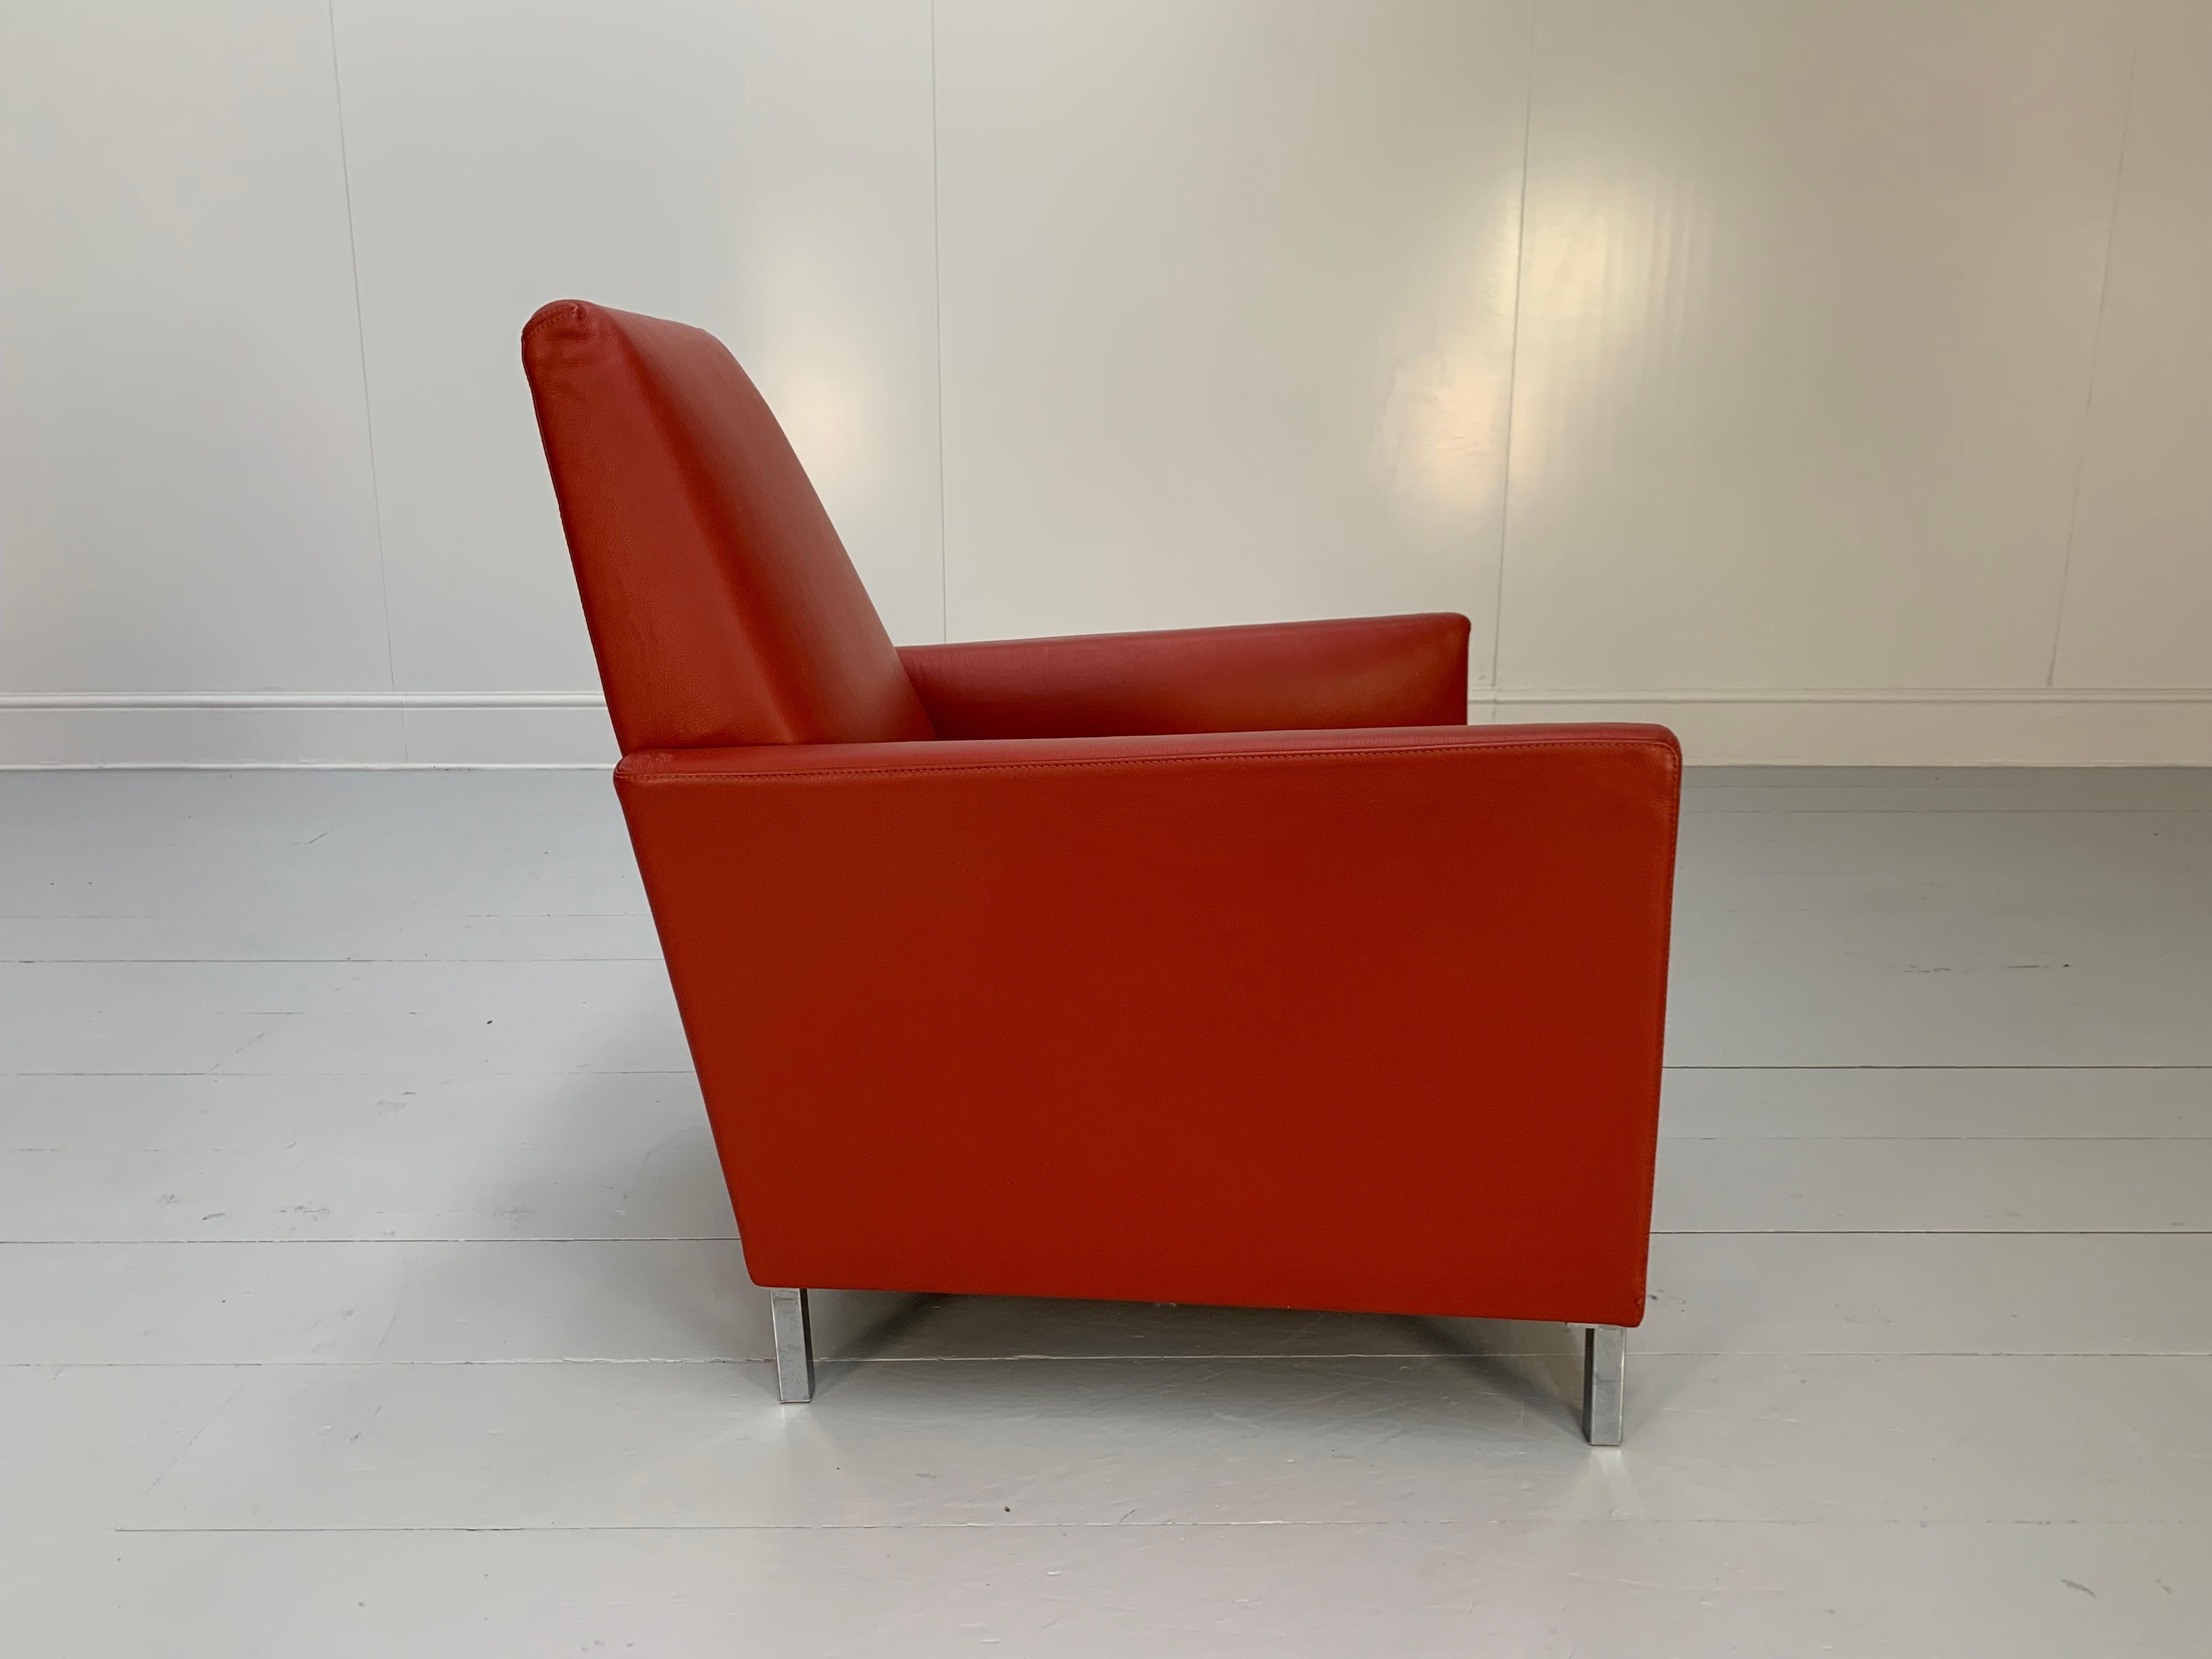 Moroso “Hyde Park” Sofa & 2 Armchair Suite, in Red “Pelle” Leather For Sale 8